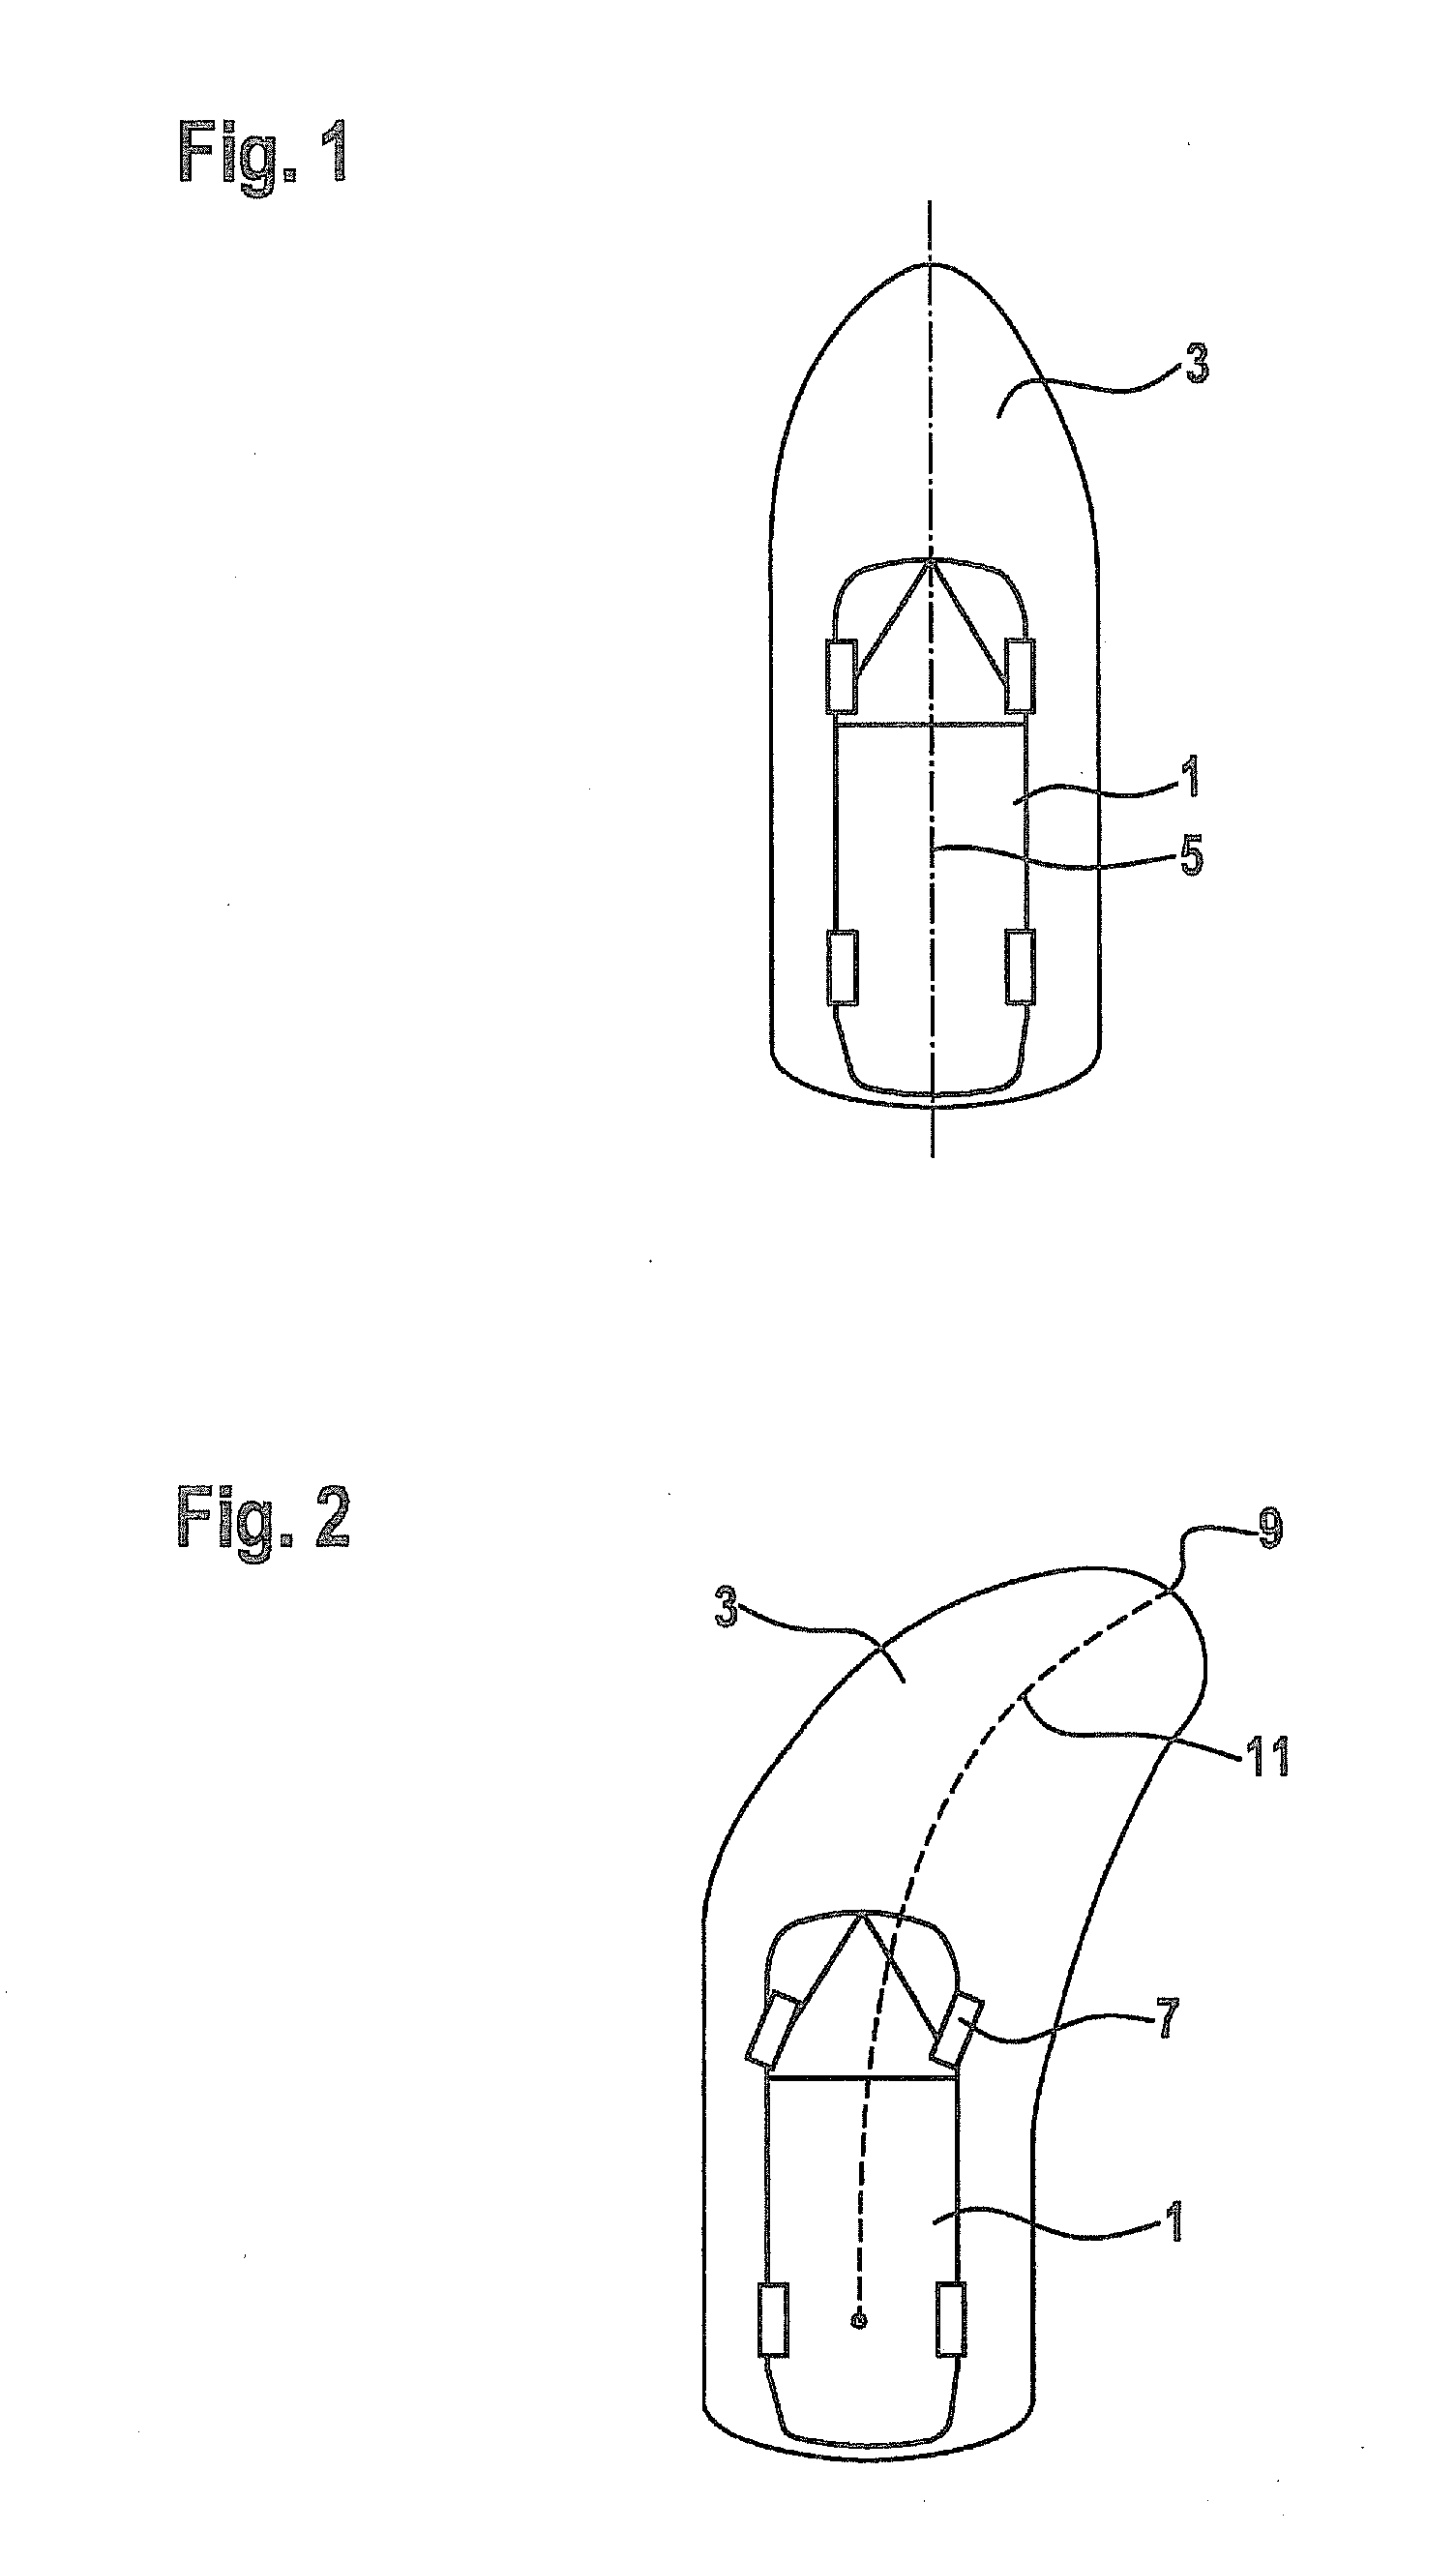 Method for assisting a driver of a vehicle during a driving maneuver